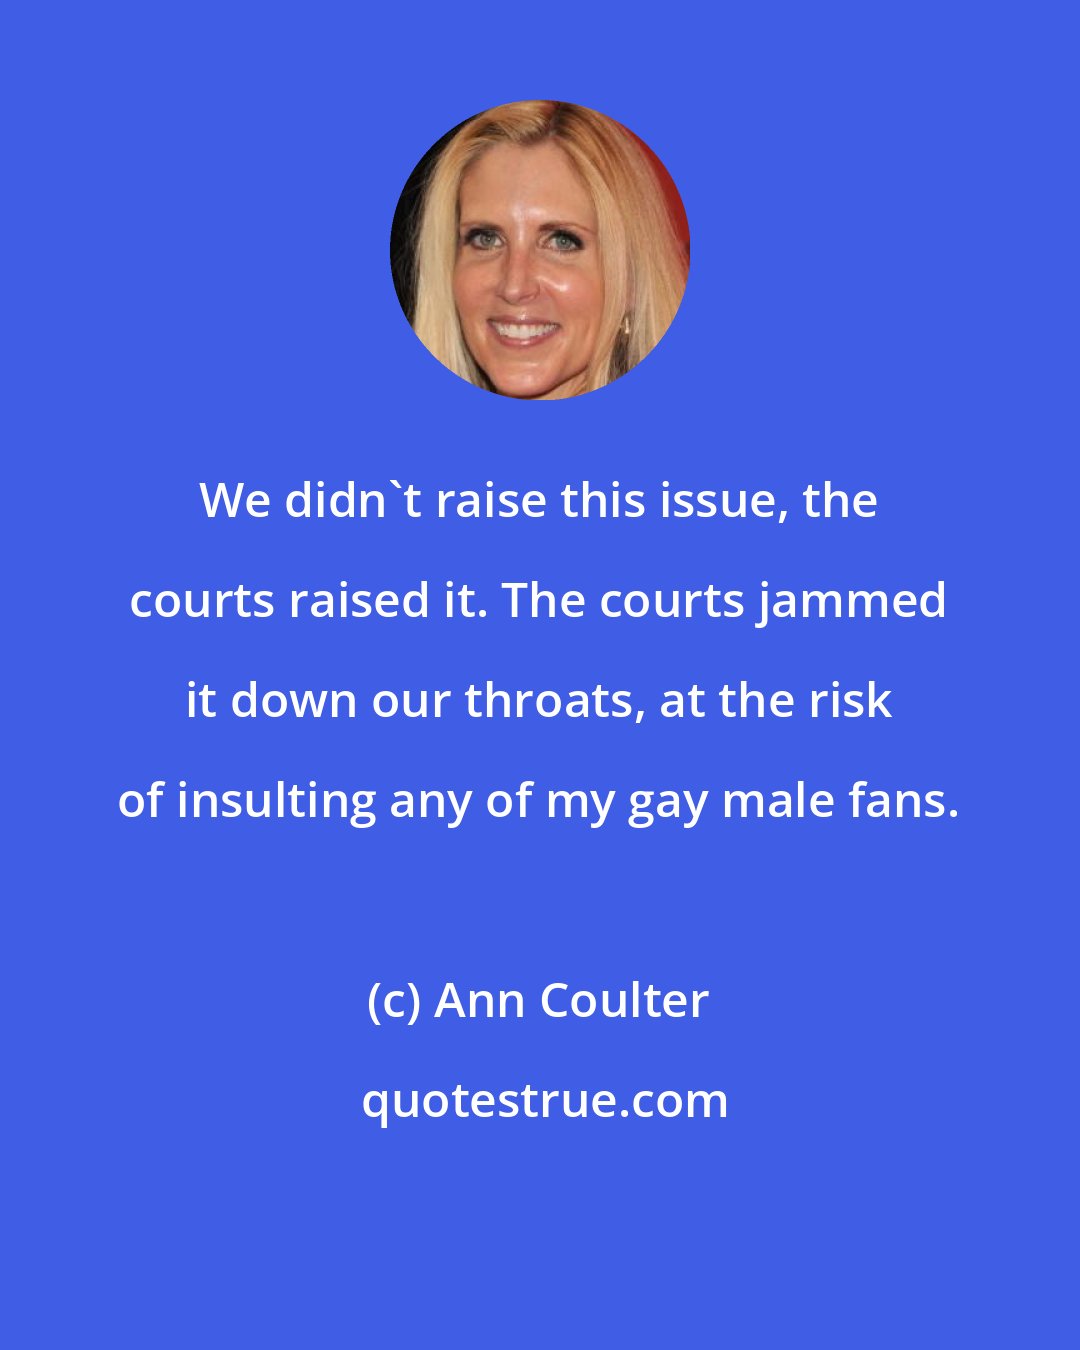 Ann Coulter: We didn't raise this issue, the courts raised it. The courts jammed it down our throats, at the risk of insulting any of my gay male fans.